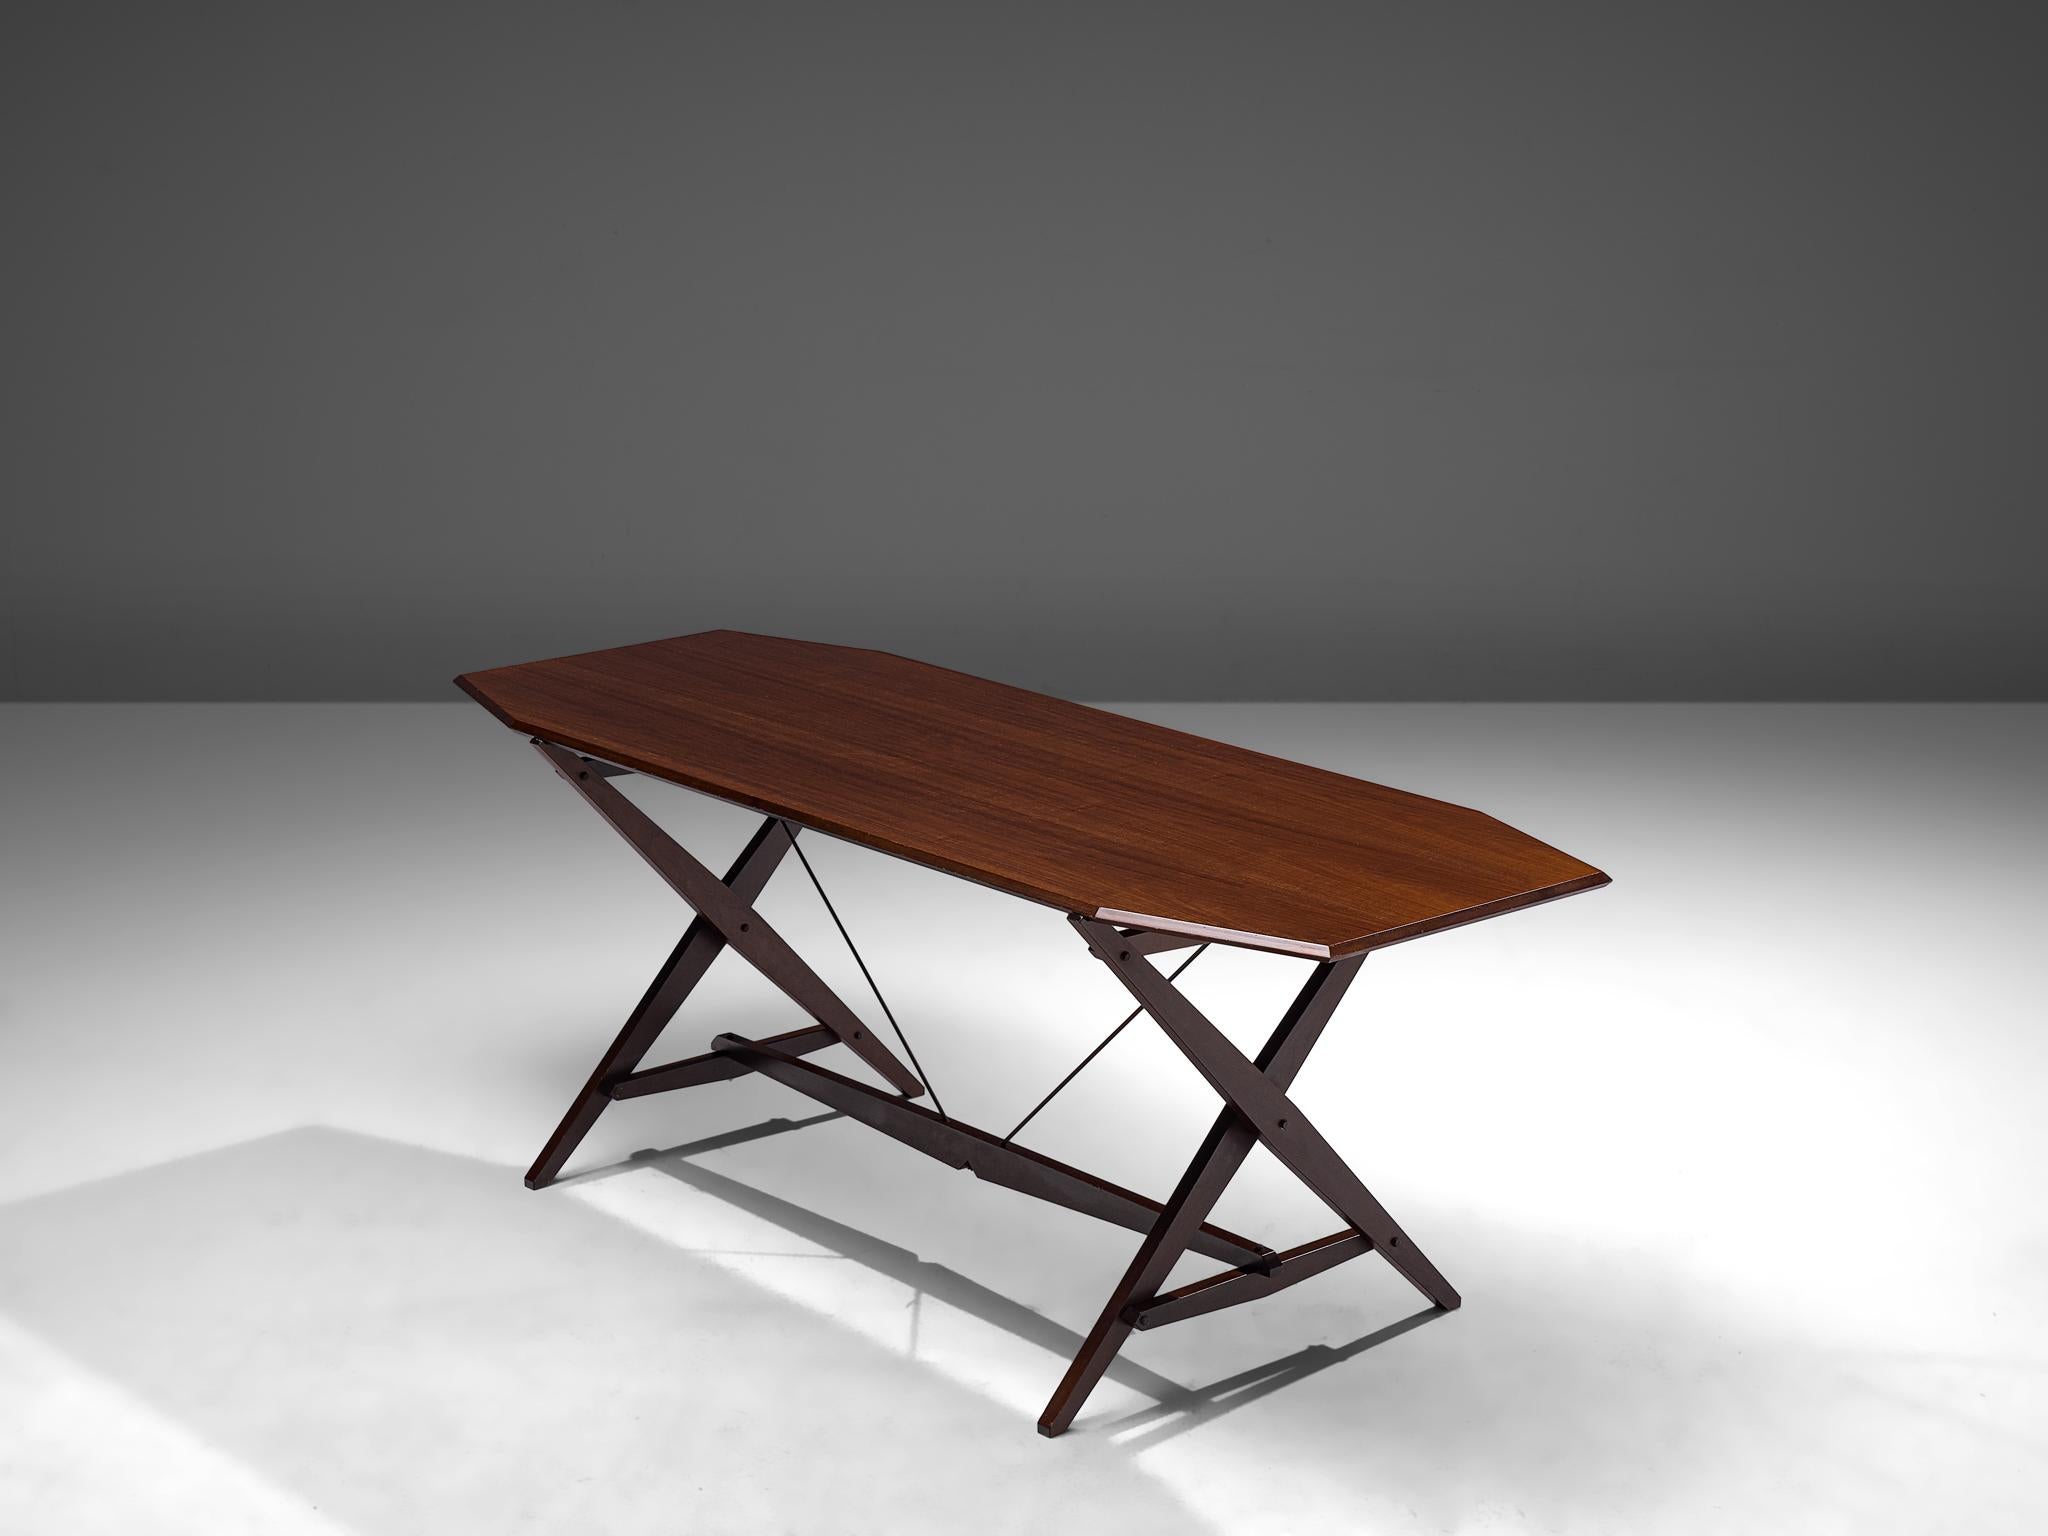 Franco Albini for Poggi, dining table model TL2, walnut and metal, Italy, 1951

The TL2 table by Franco Albini features a simplistic and sleek design. Executed in darkened walnut wood that features a rectangular tabletop with beveled edges. The